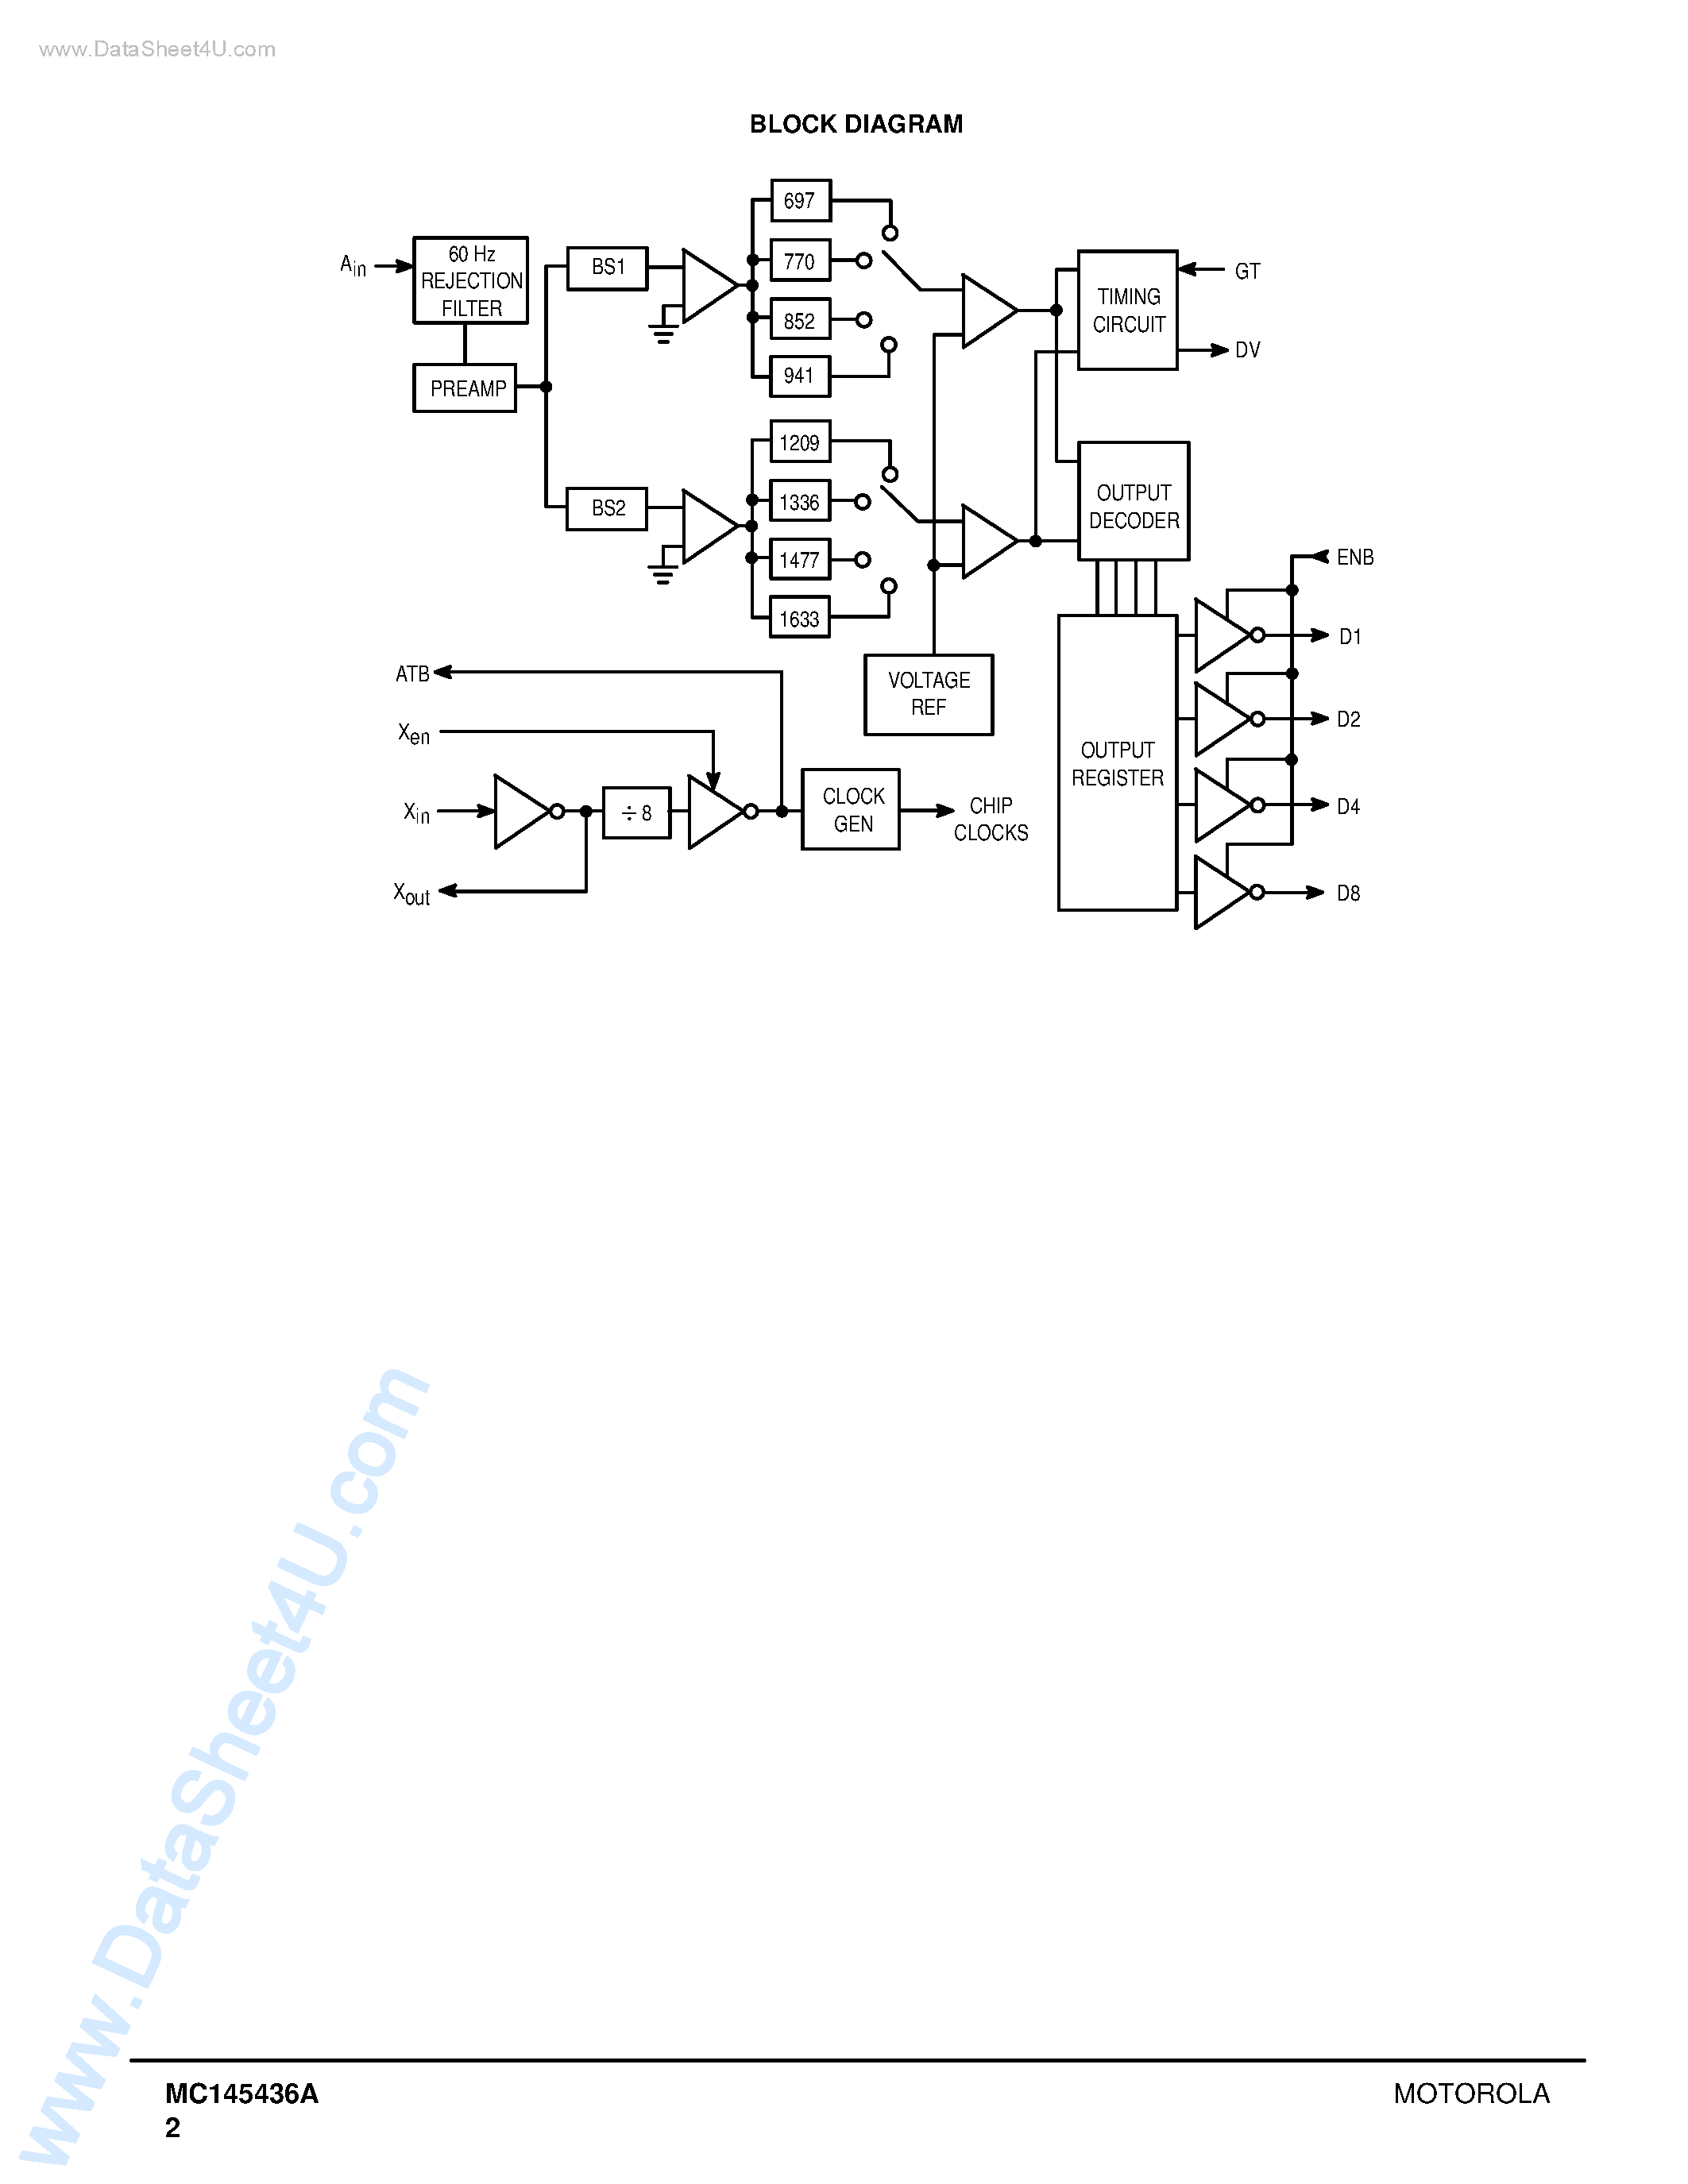 Datasheet MC145436A - Low Power Dual Tone Multiple Frequency Receiver page 2